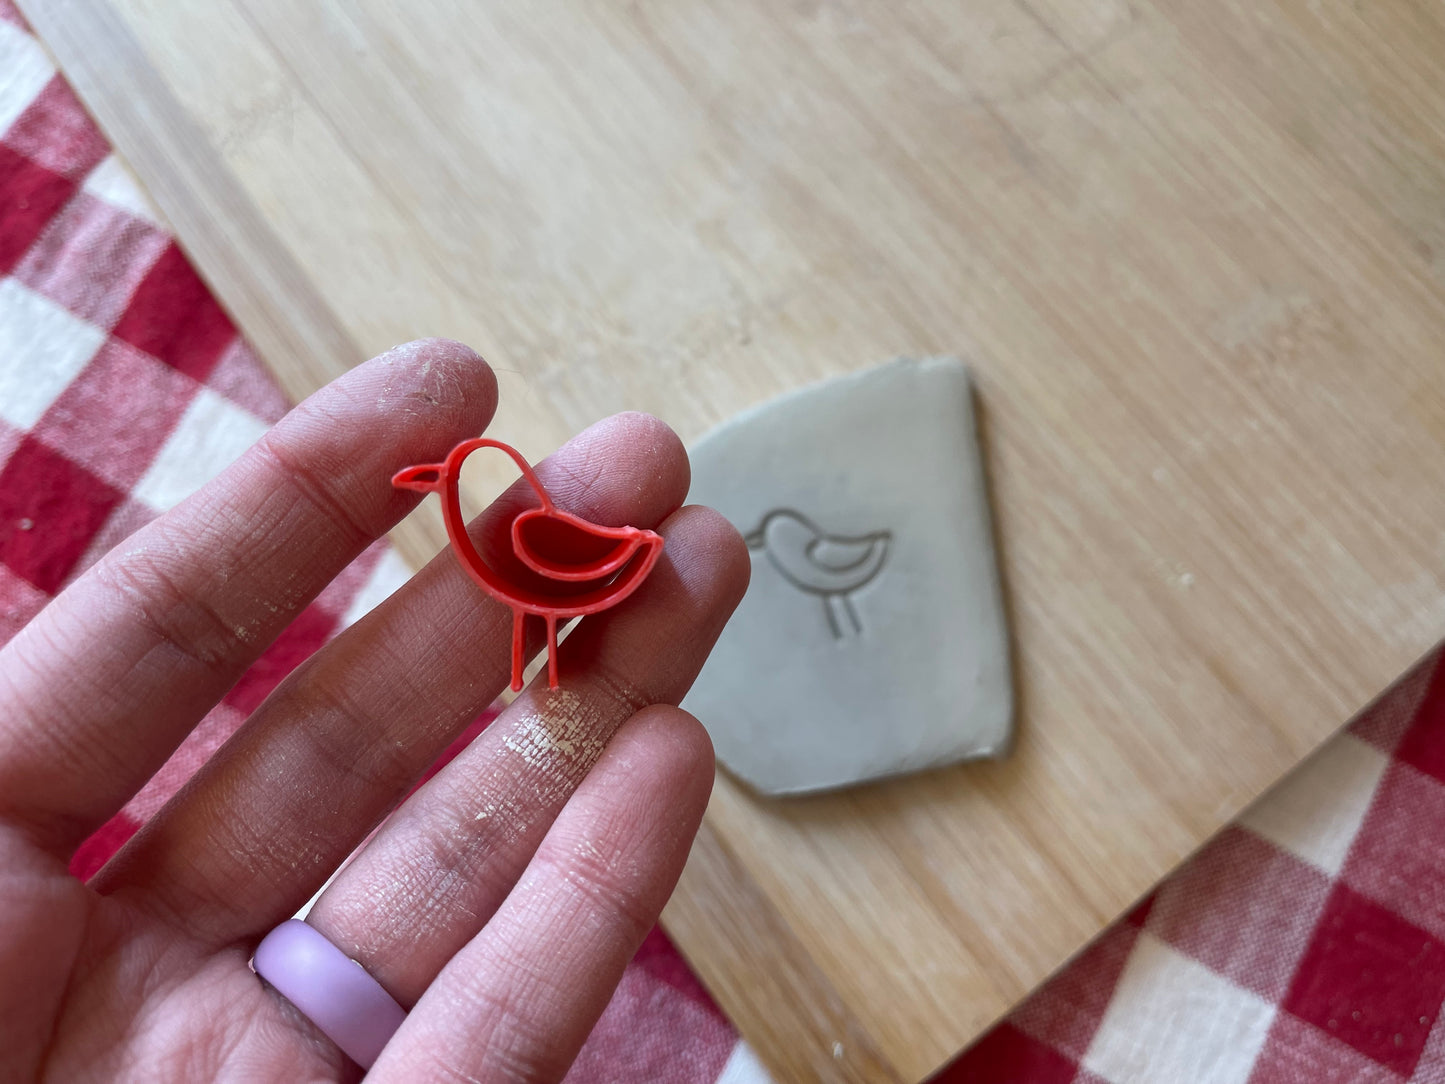 Seagull Mini Pottery Stamp - Alabama Clay Conference plastic 3D printed, multiple sizes